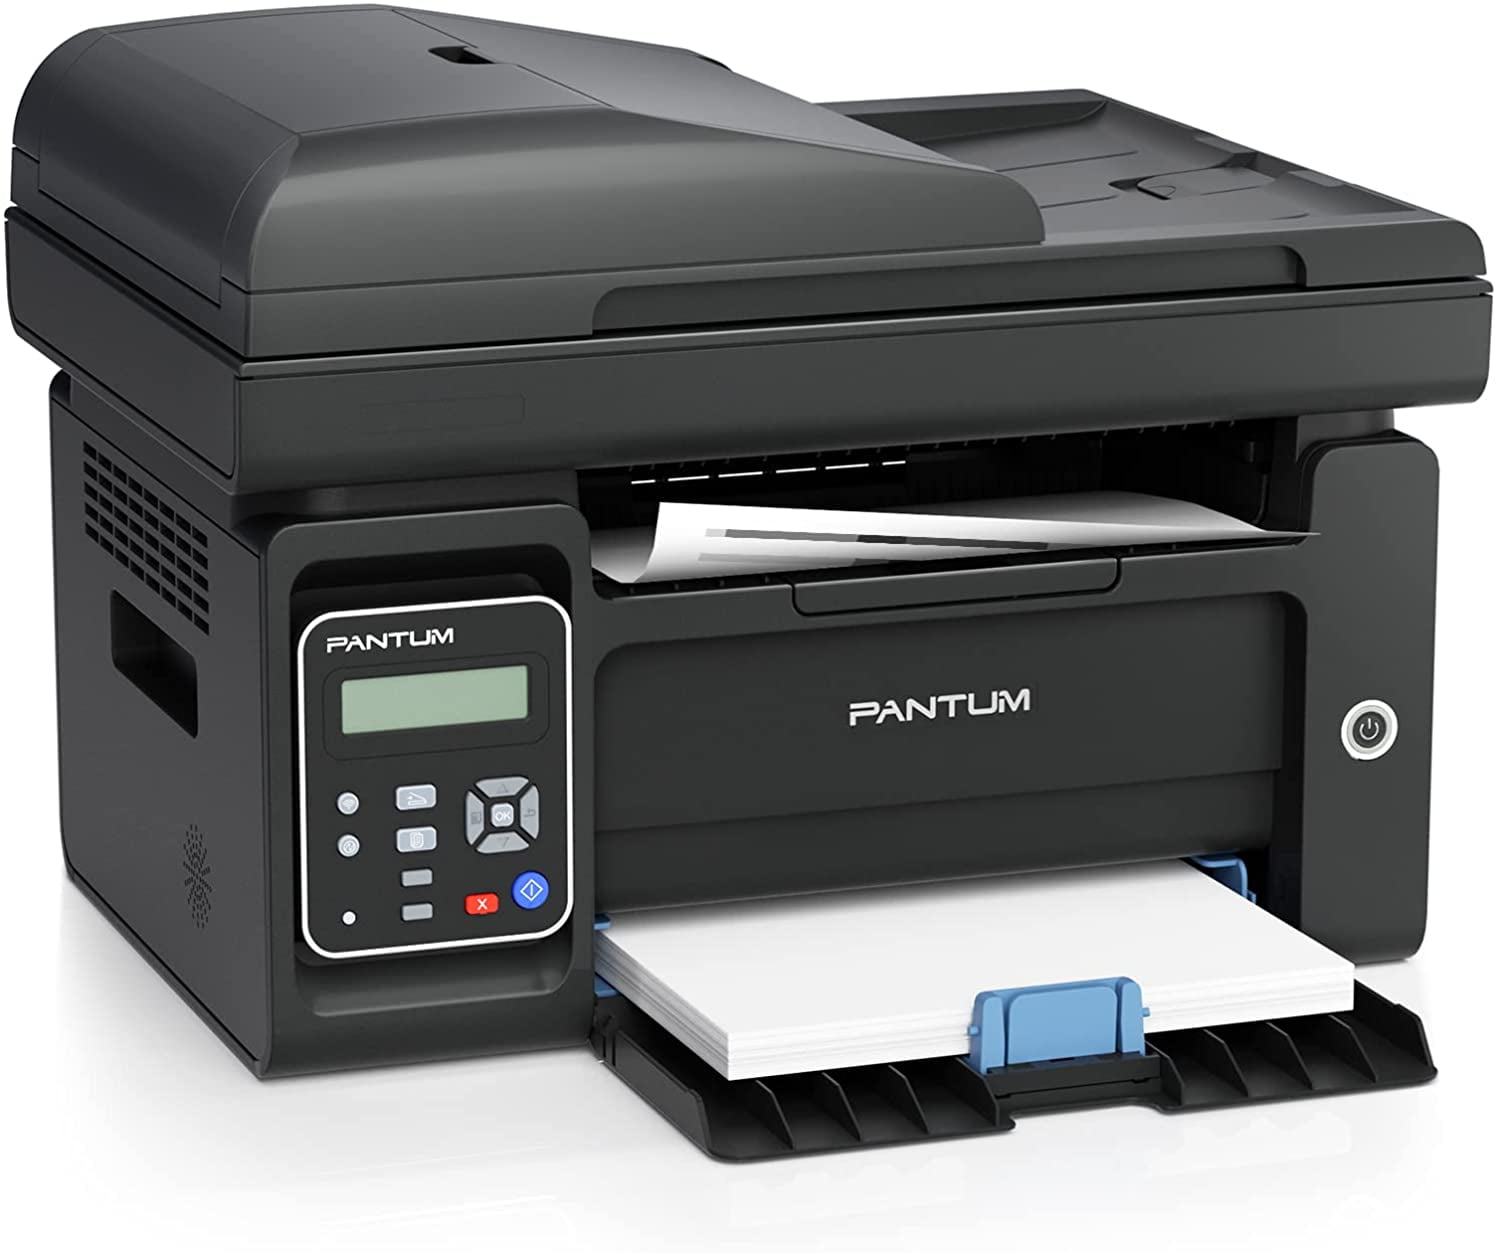 undskylde Somatisk celle publikum Pantum M6552NW Laser Printer All in One Scanner Copier Wireless Monochrome  Black and White Printer Home Office - Print Copy Scan, Speed Up to 23 ppm,  50-Sheet ADF, 150 Large Paper Capacity - Walmart.com